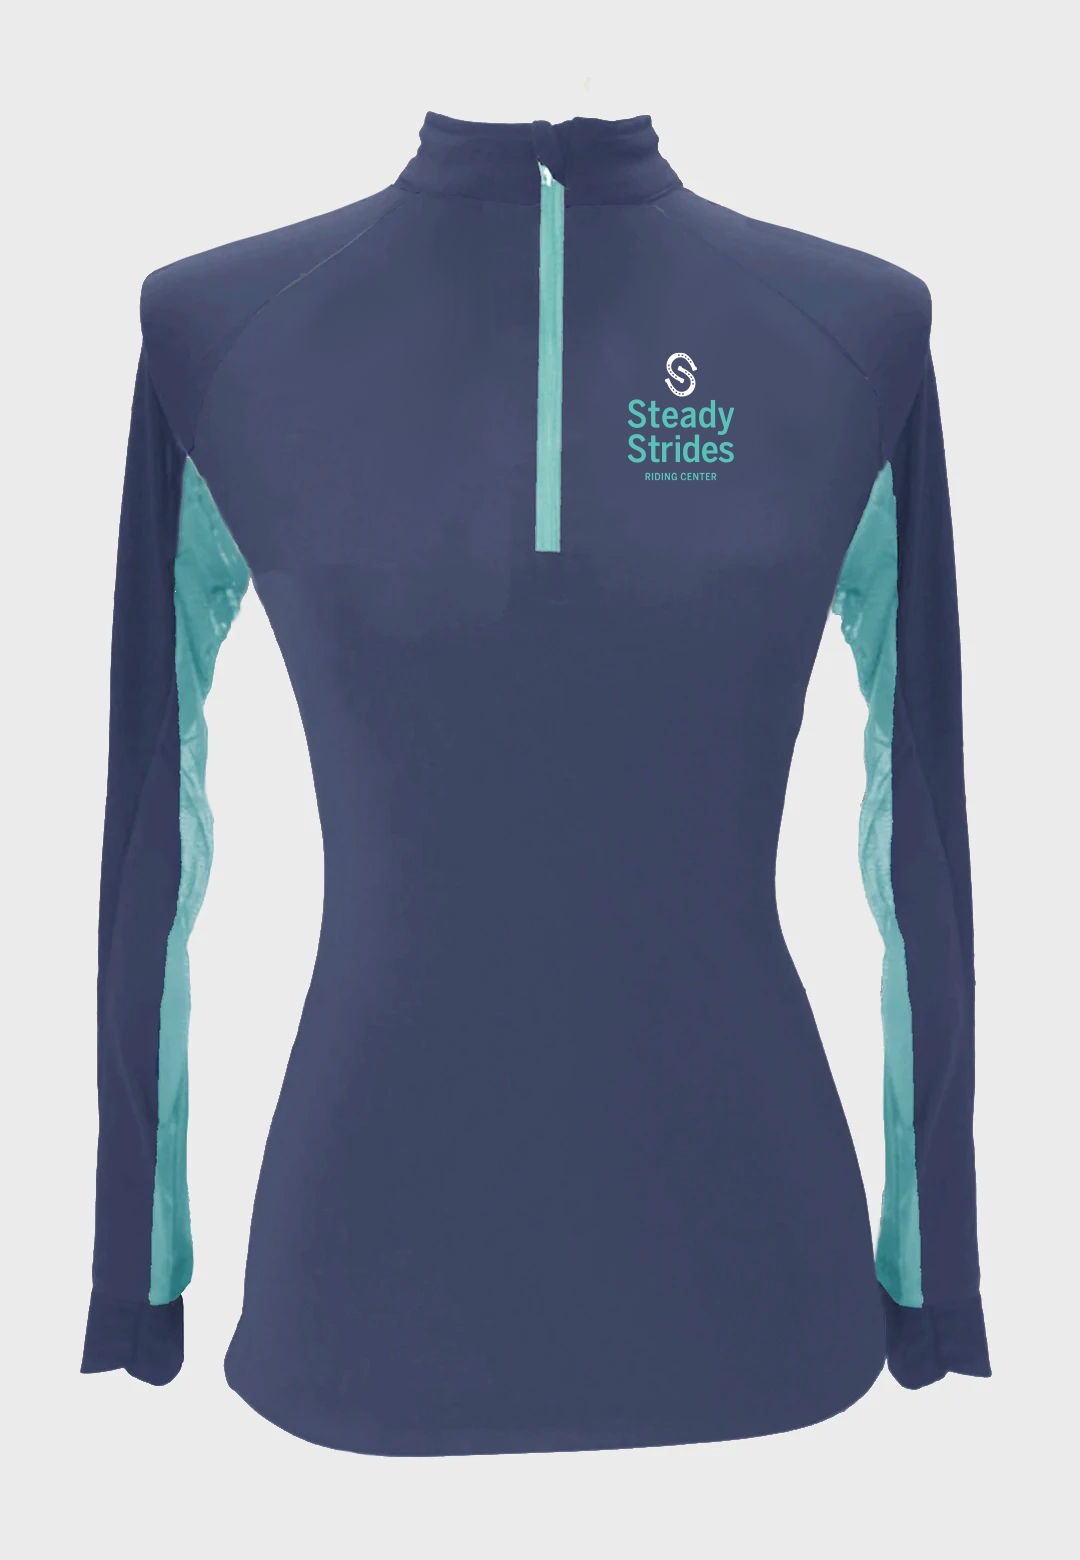 Steady Strides Riding Center Sun Shirt with Turquoise Accents  -    Adult + Youth sizes, Multiple Color Options